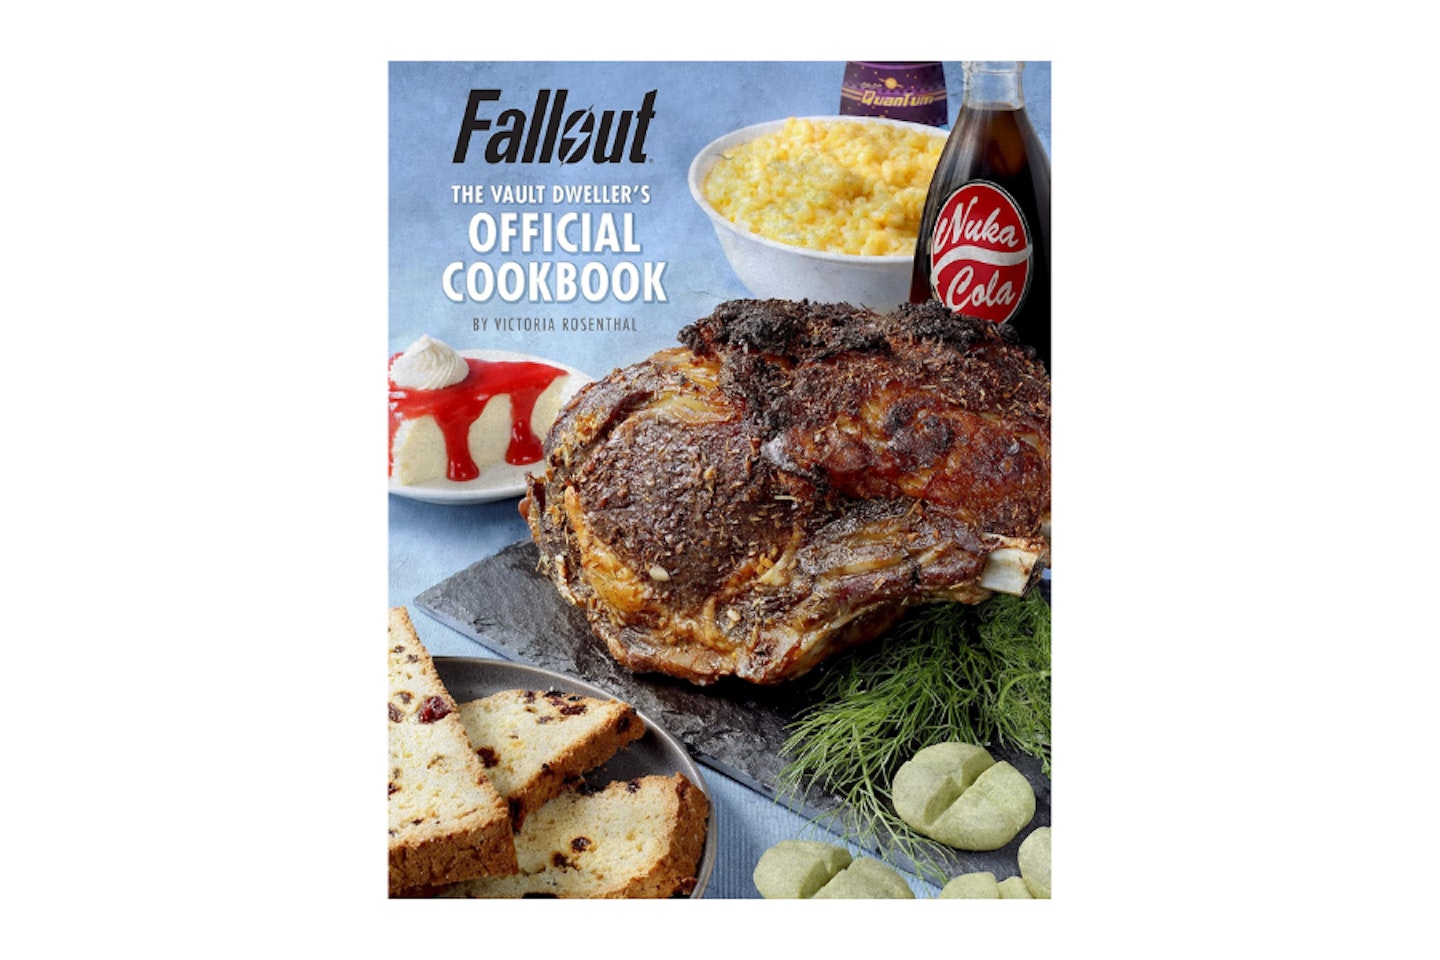 Fallout: The Vault Dweller's Official Cookbook - one of the best gifts for gamers